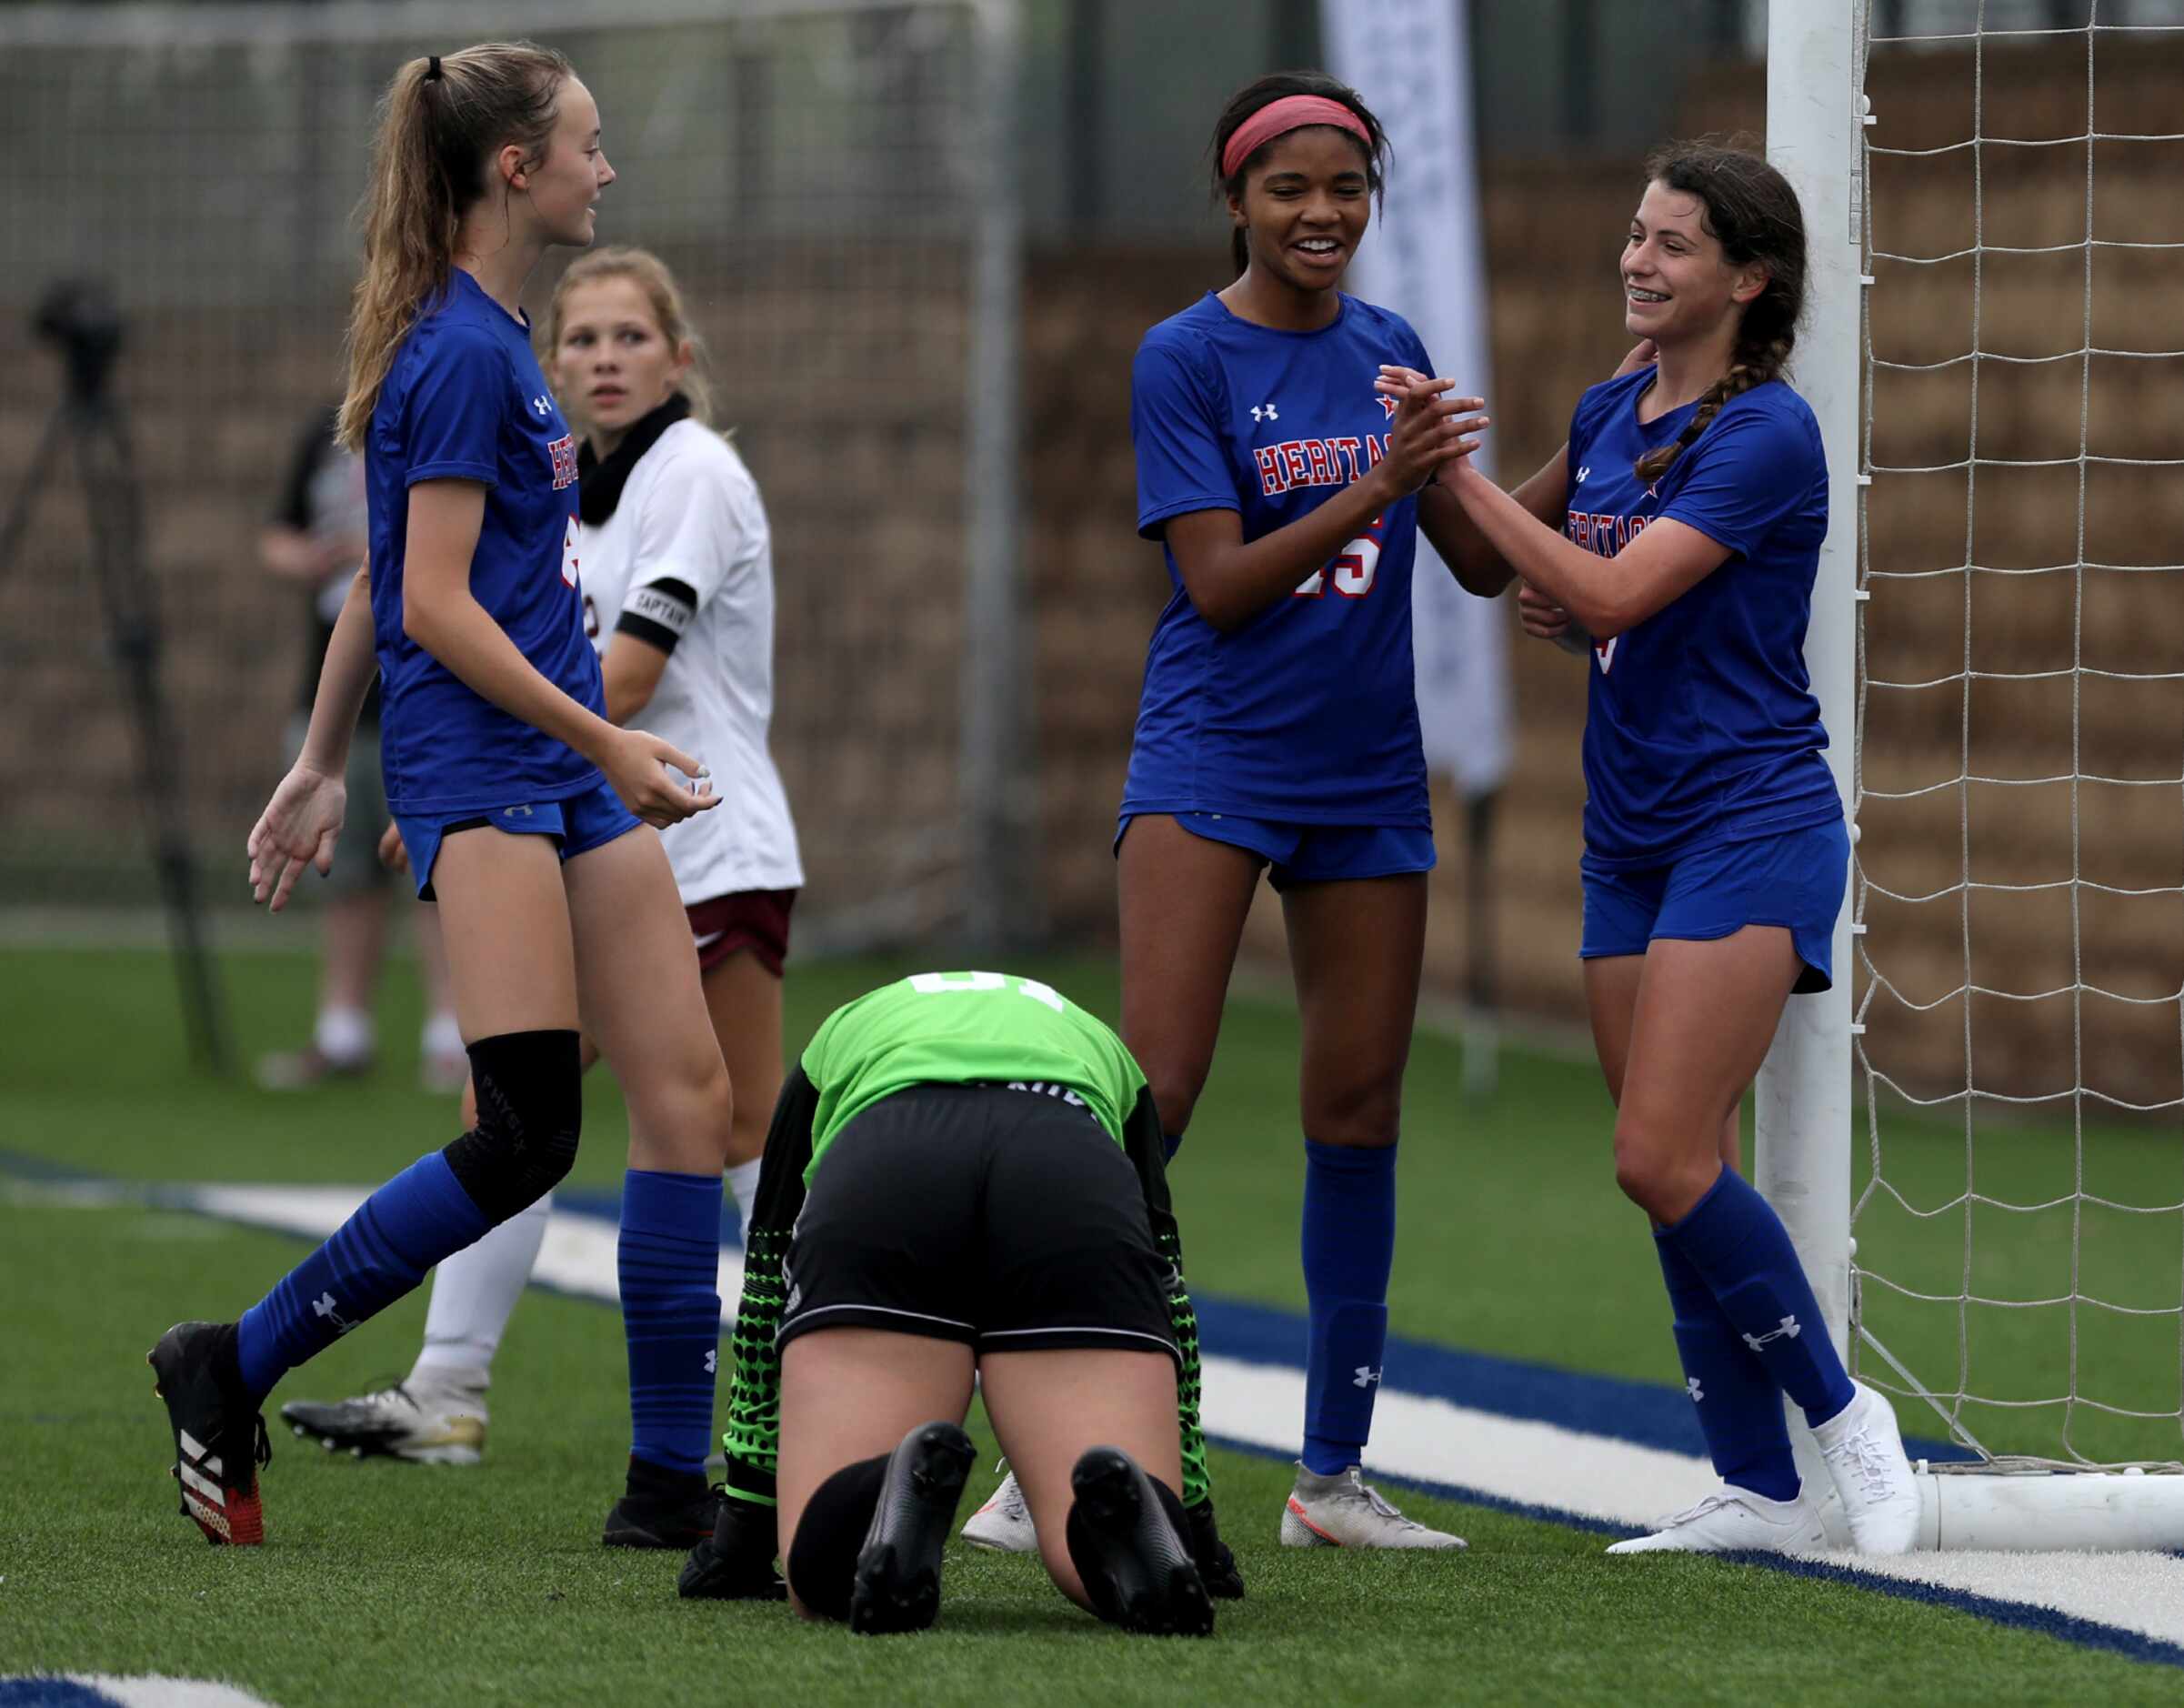 Midlothian Heritage players celebrate as they make another goal against Calallen during...